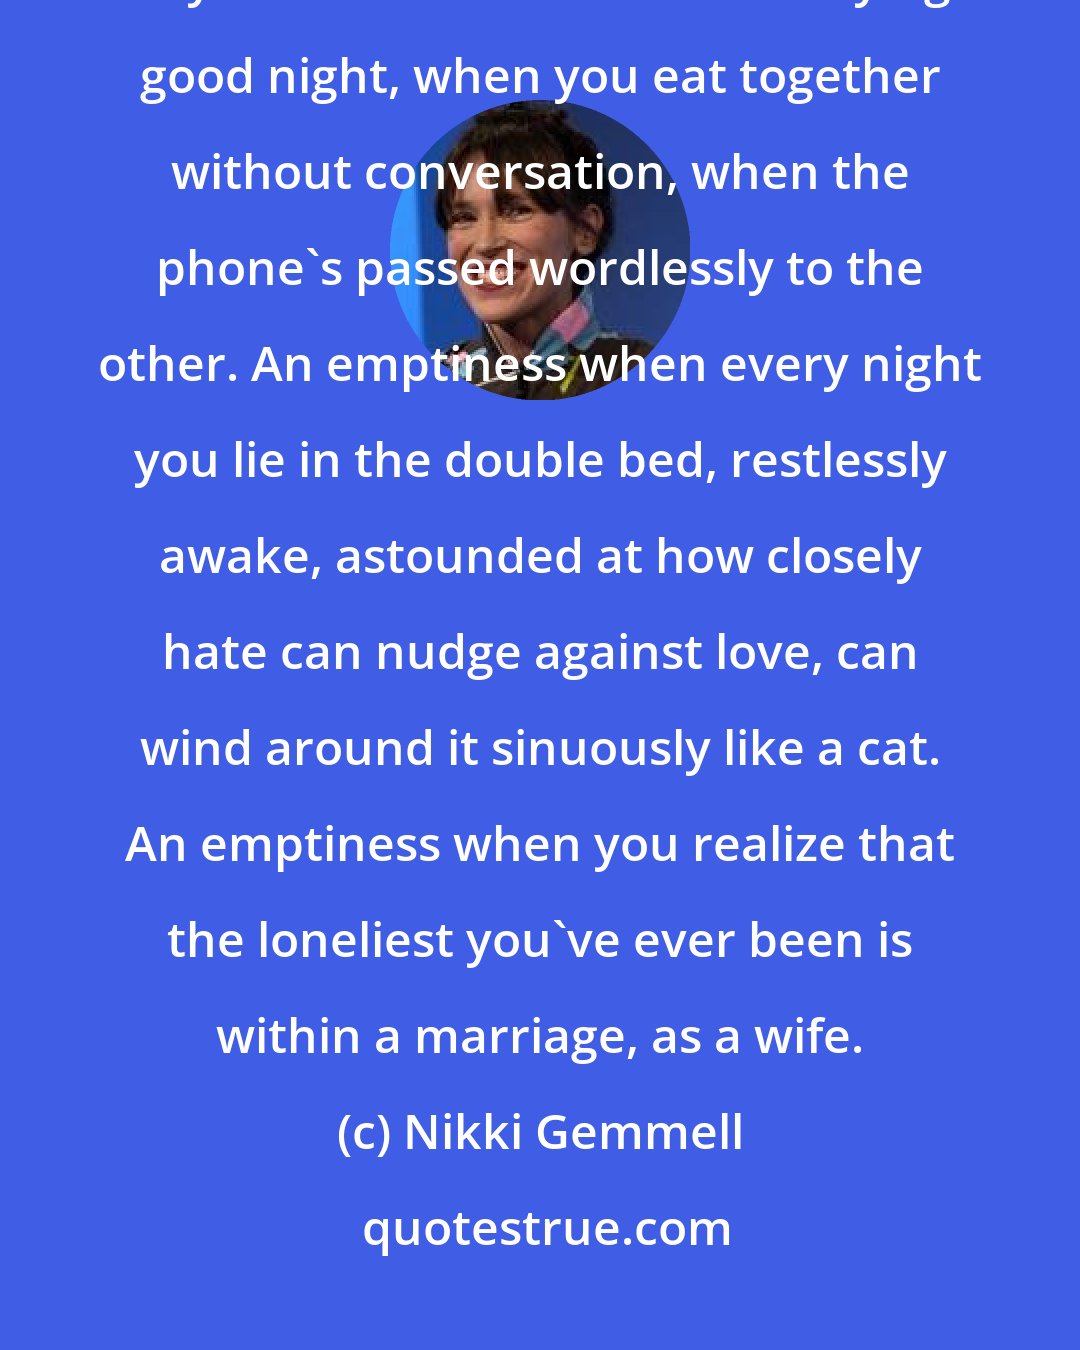 Nikki Gemmell: An emptiness rules at its core, a rottenness, a silence when one of you retires to bed without saying good night, when you eat together without conversation, when the phone's passed wordlessly to the other. An emptiness when every night you lie in the double bed, restlessly awake, astounded at how closely hate can nudge against love, can wind around it sinuously like a cat. An emptiness when you realize that the loneliest you've ever been is within a marriage, as a wife.